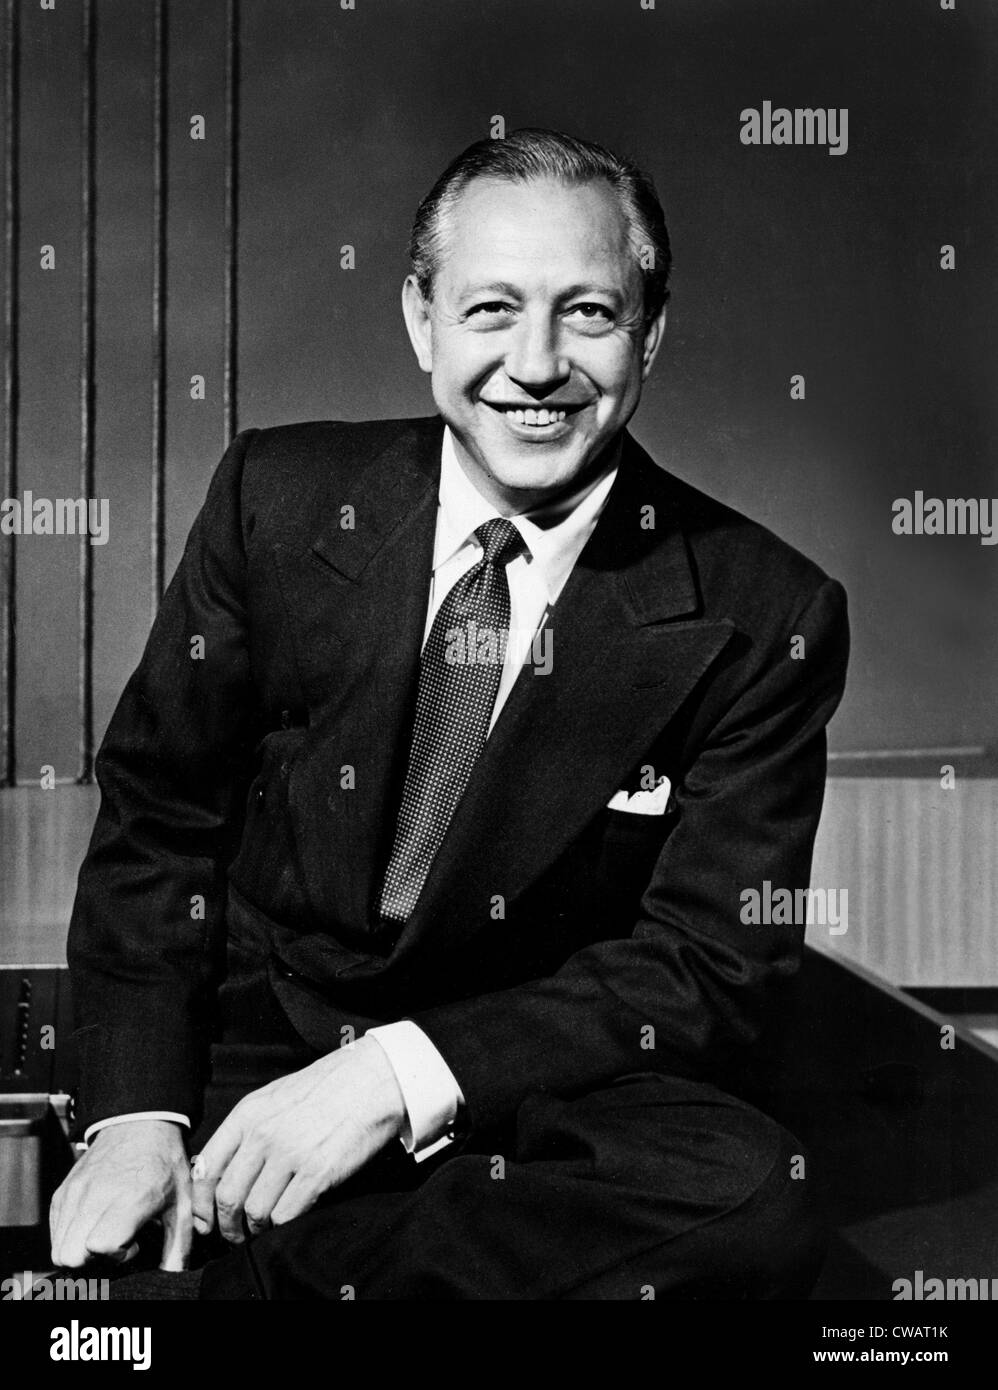 WILLIAM S. PALEY, Founder of CBS, photo dated 04/15/50.. Courtesy: CSU Archives / Everett Collection Stock Photo